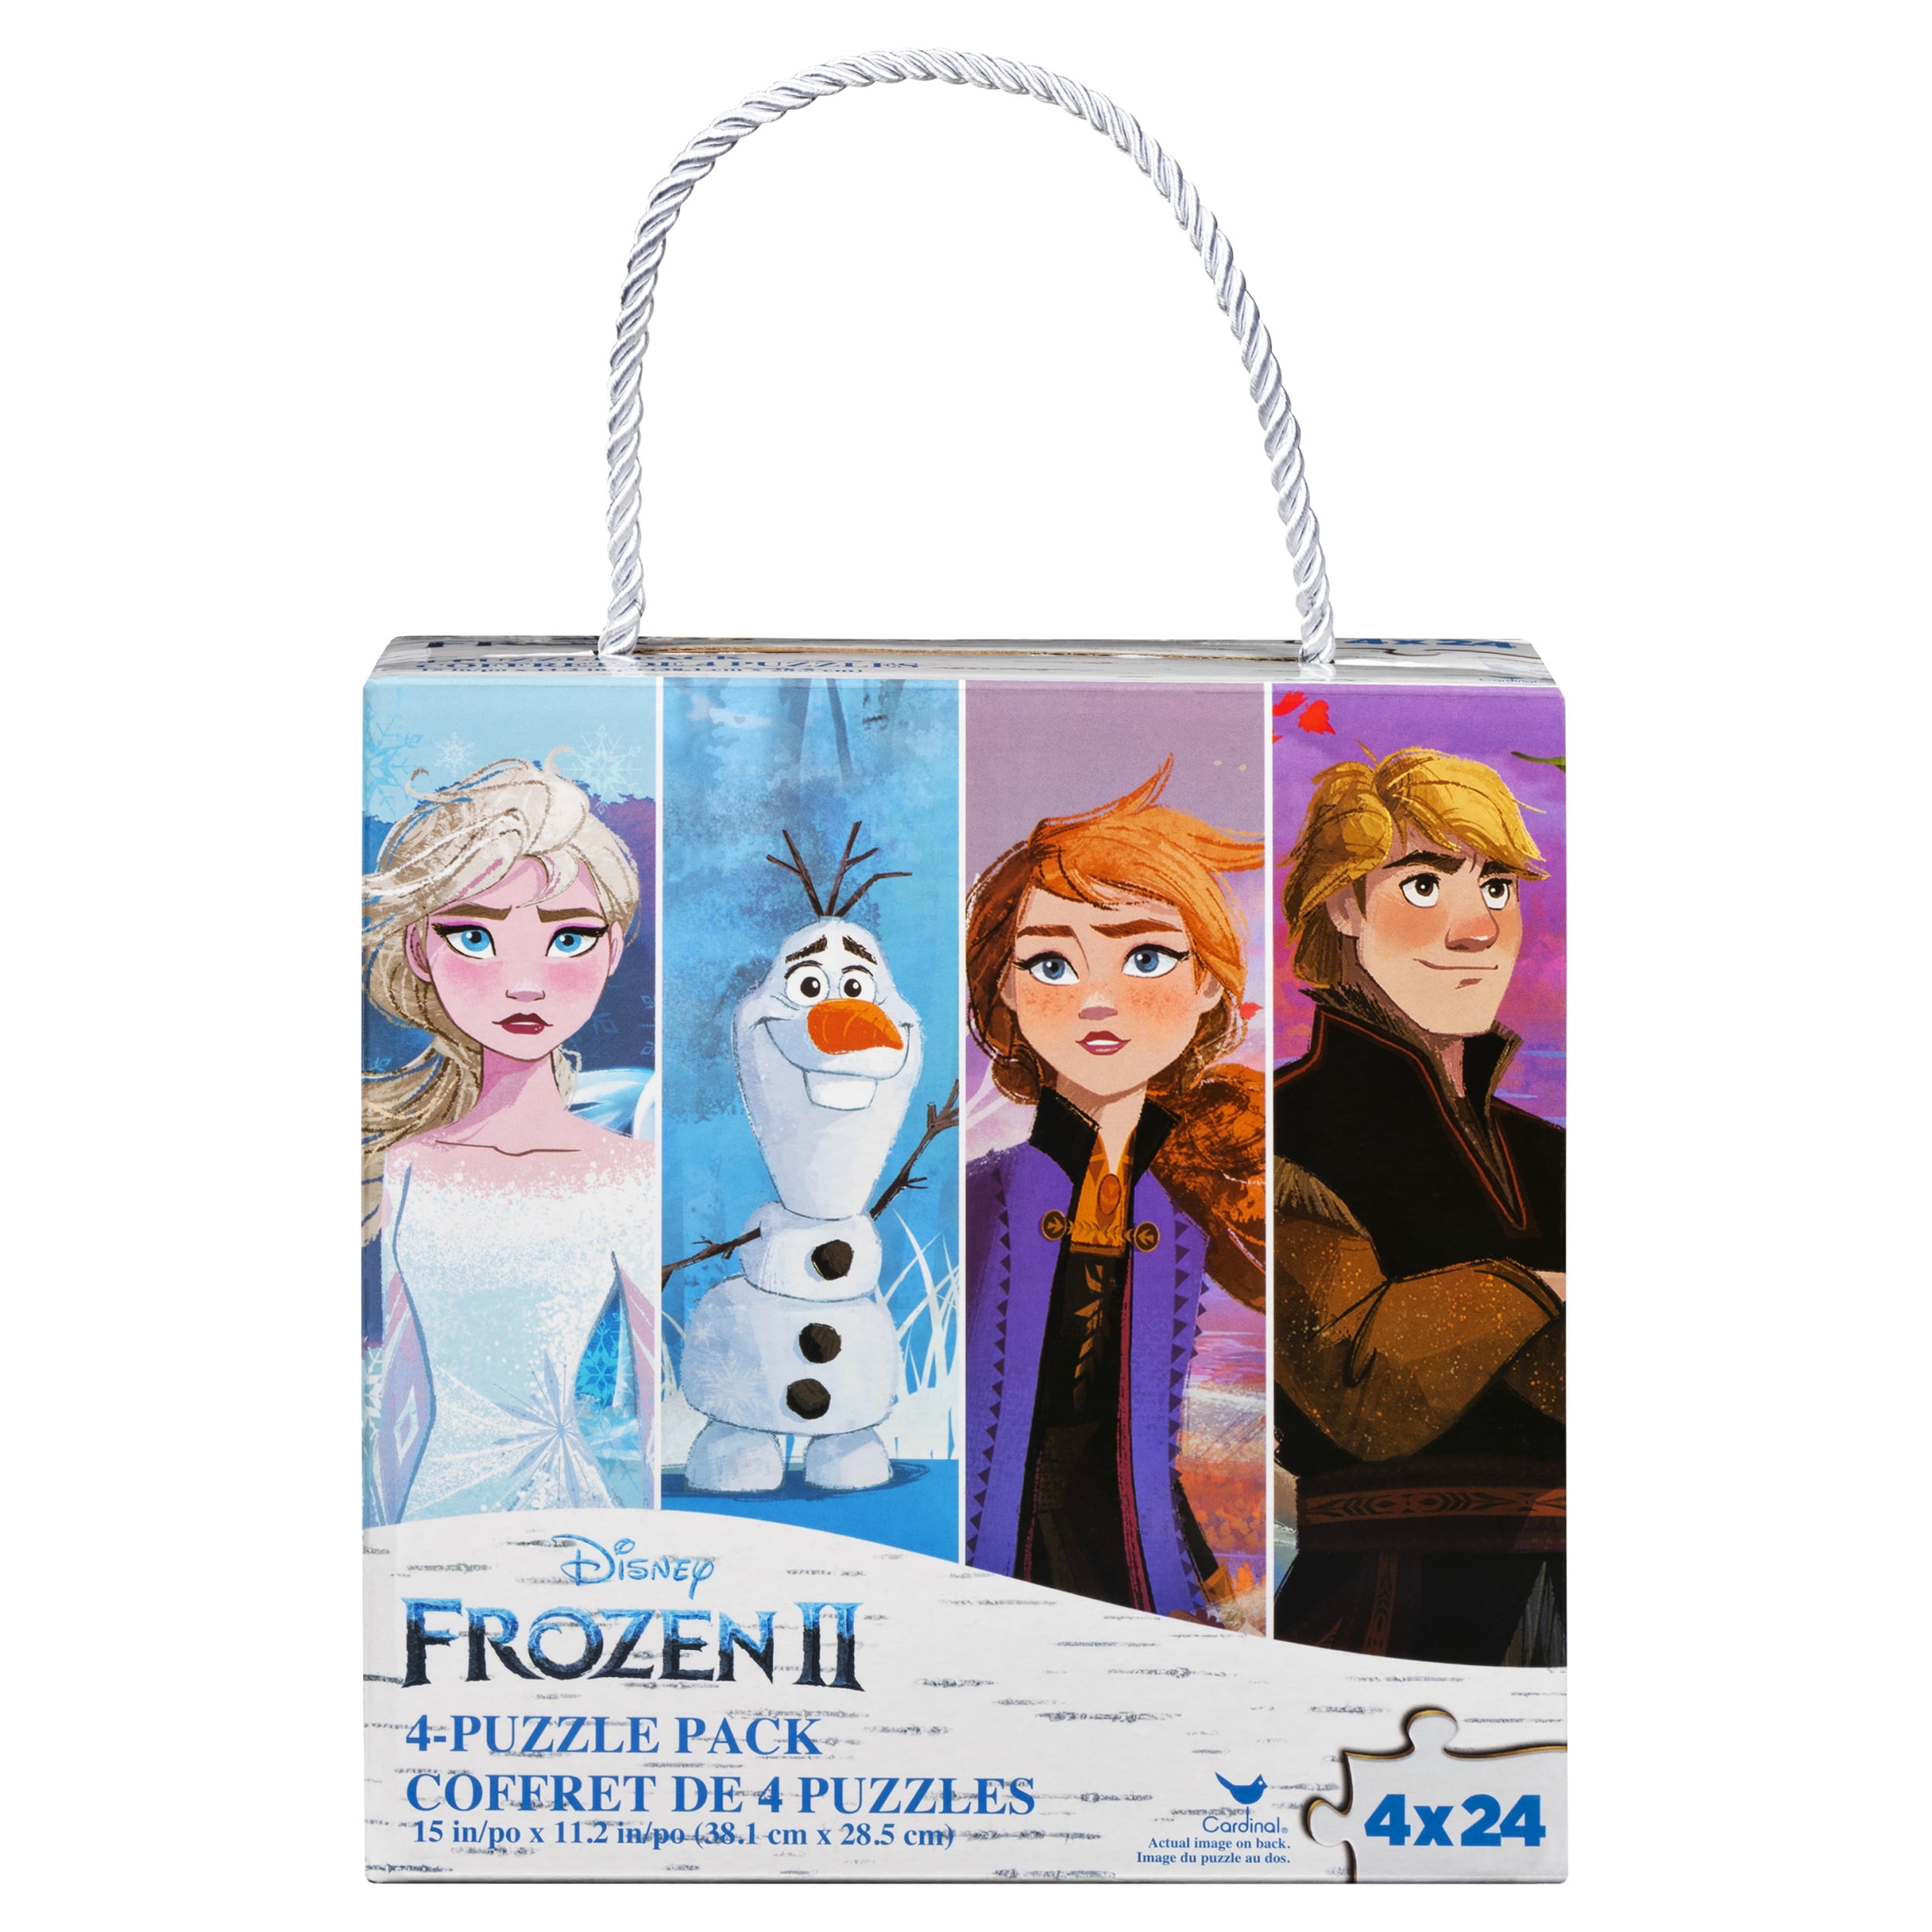 Disney FROZEN Cardinal Games Jigsaw Puzzle GREAT VALUE 4 Puzzle Pack 